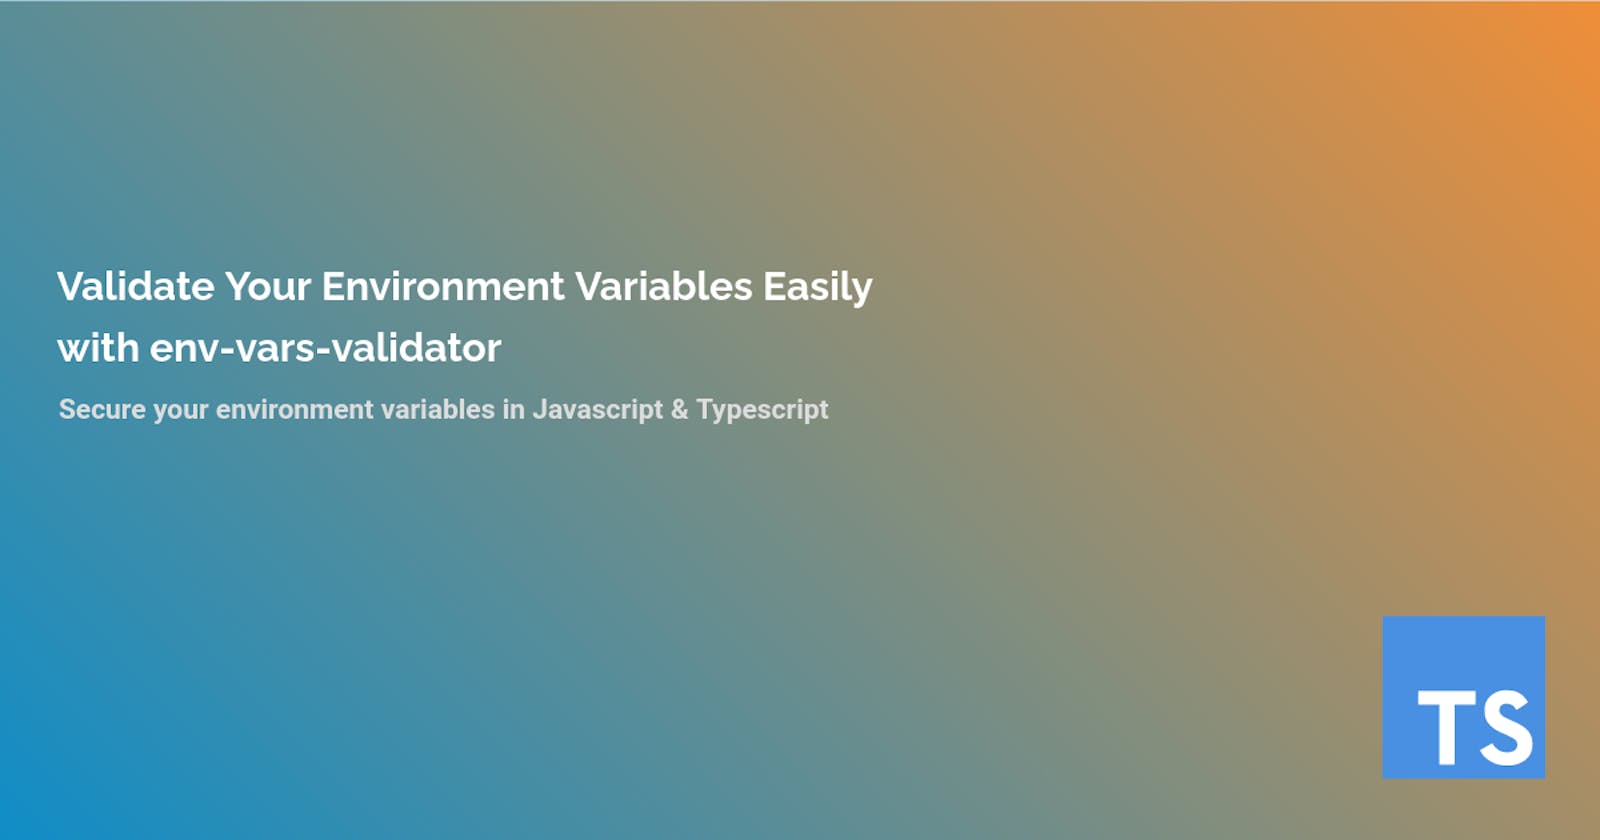 Validate Your Environment Variables Easily with env-vars-validator